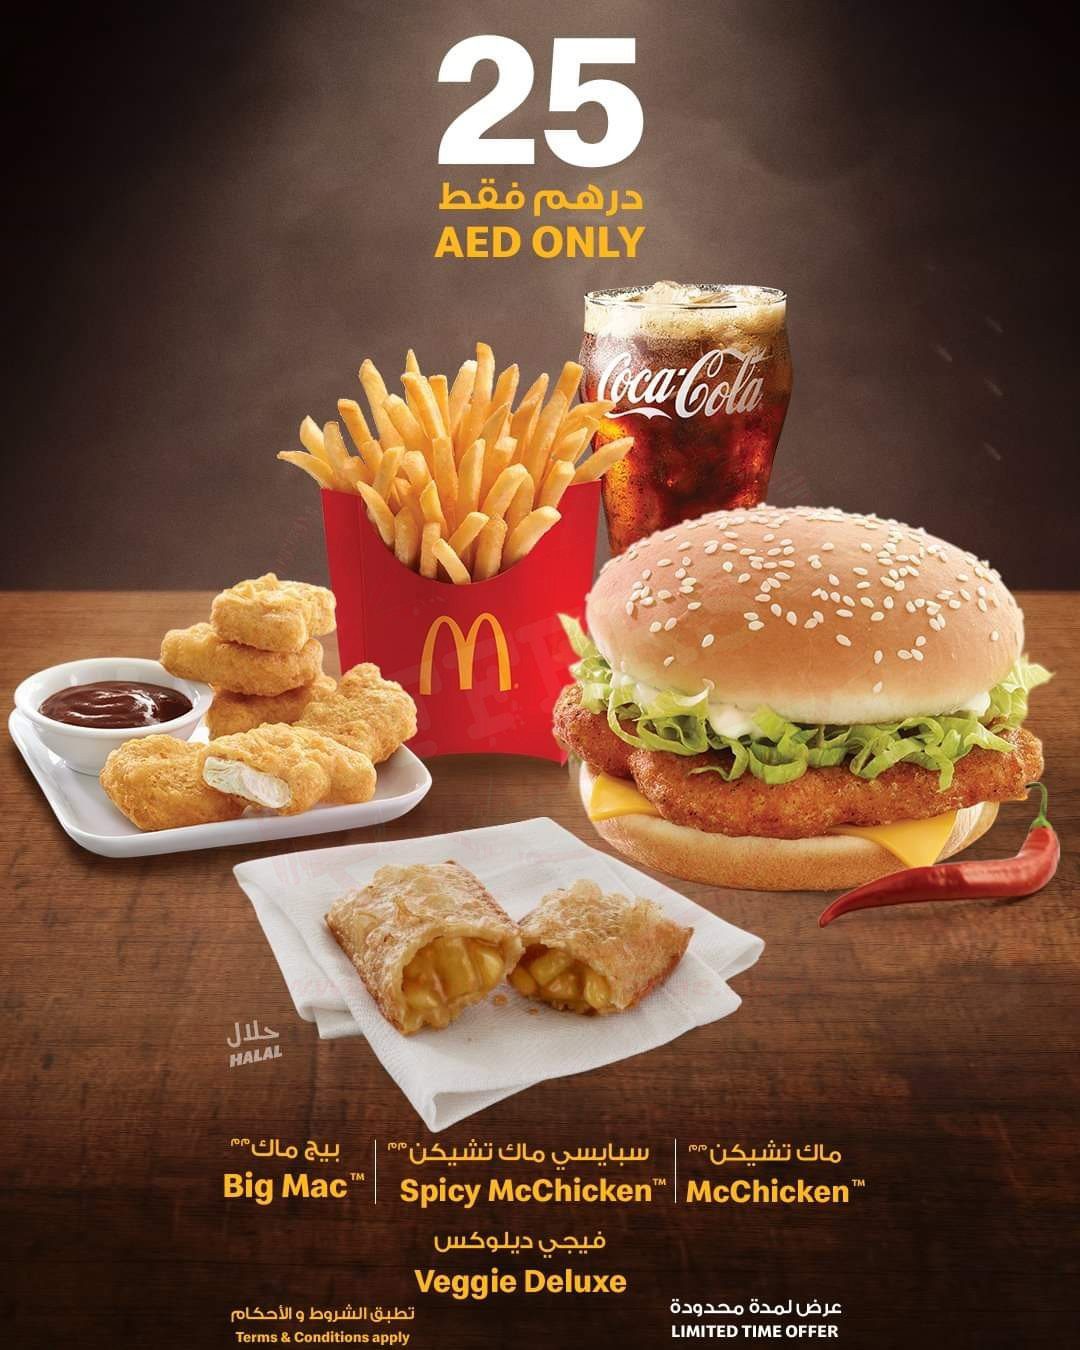 Get yourself a WOW  McDonald’s deal at AED 25 only